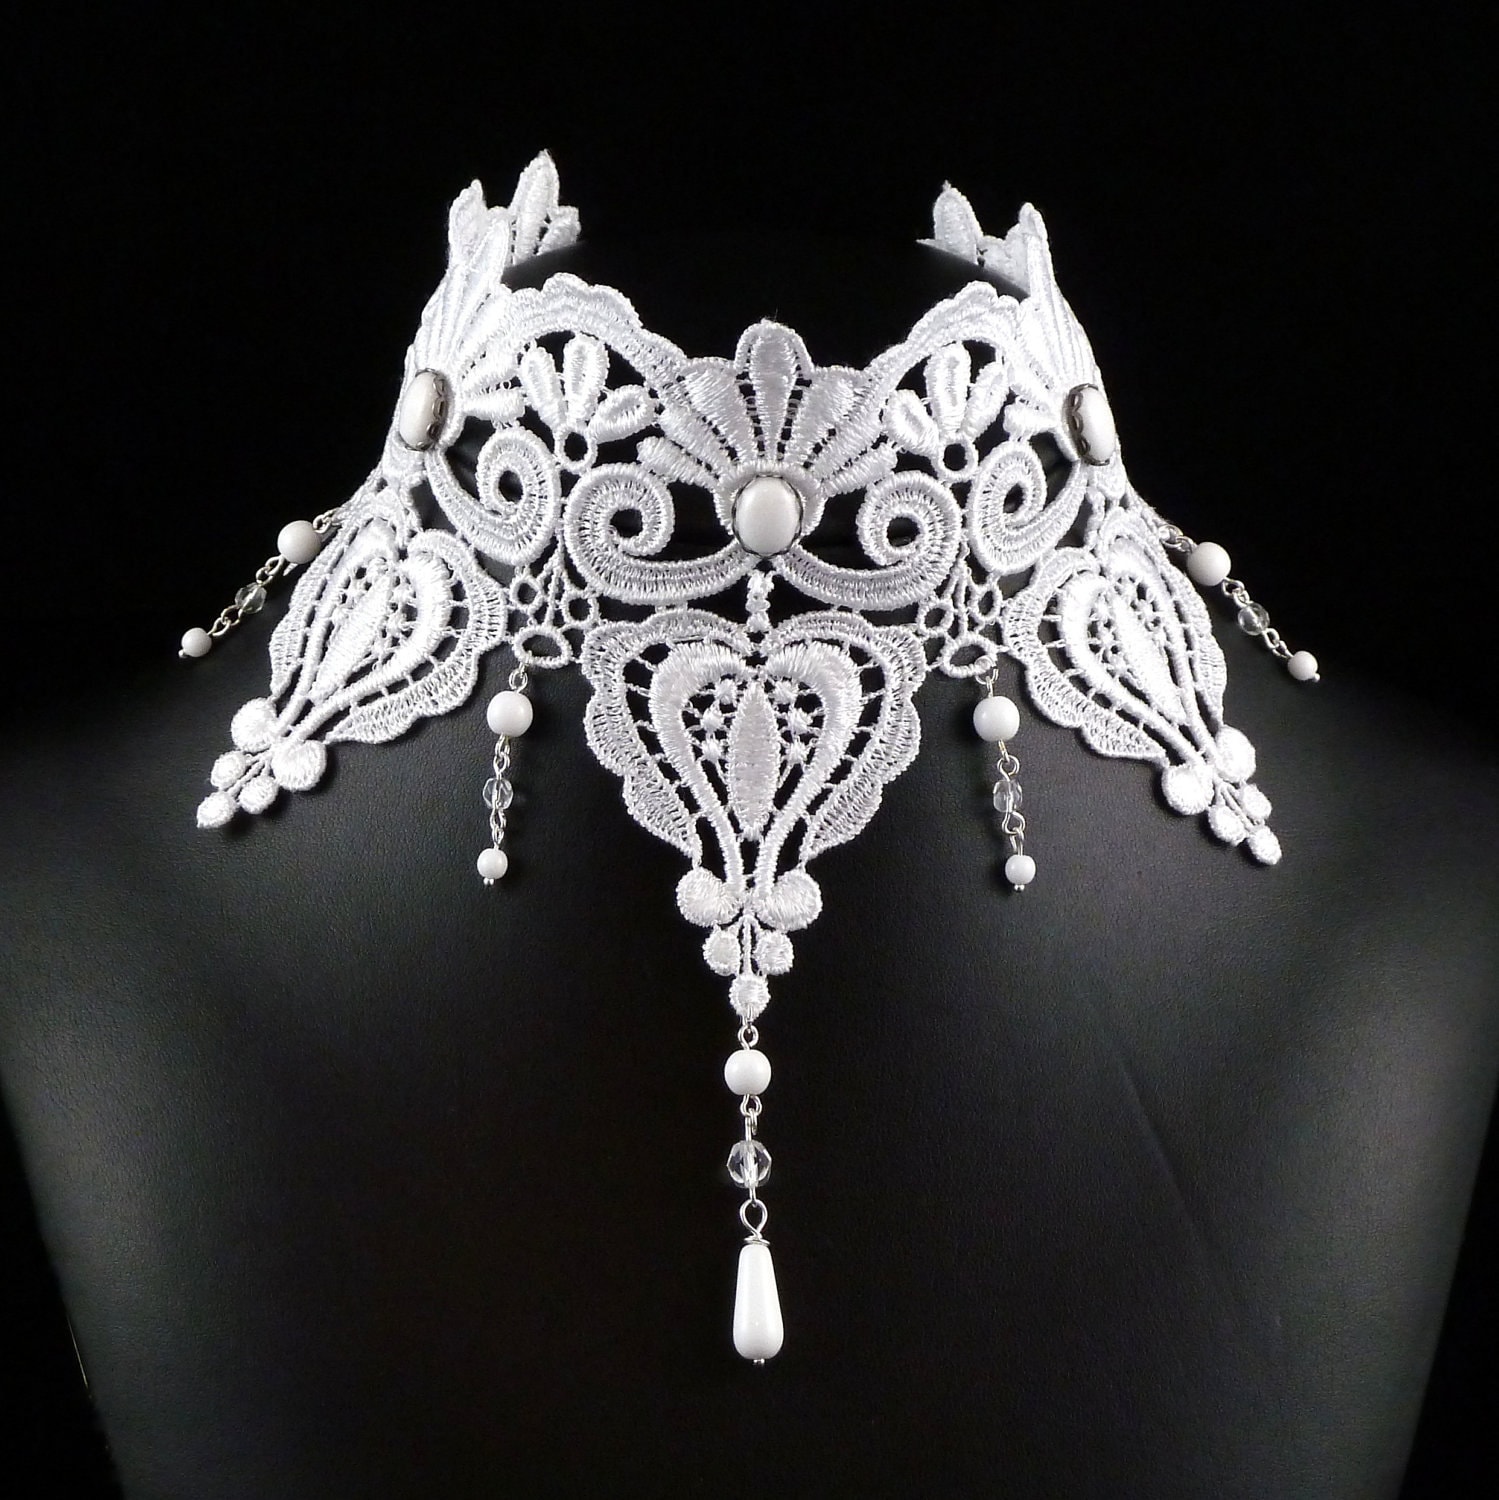 White Victorian Choker Necklace Lace Bridal Jewelry Large